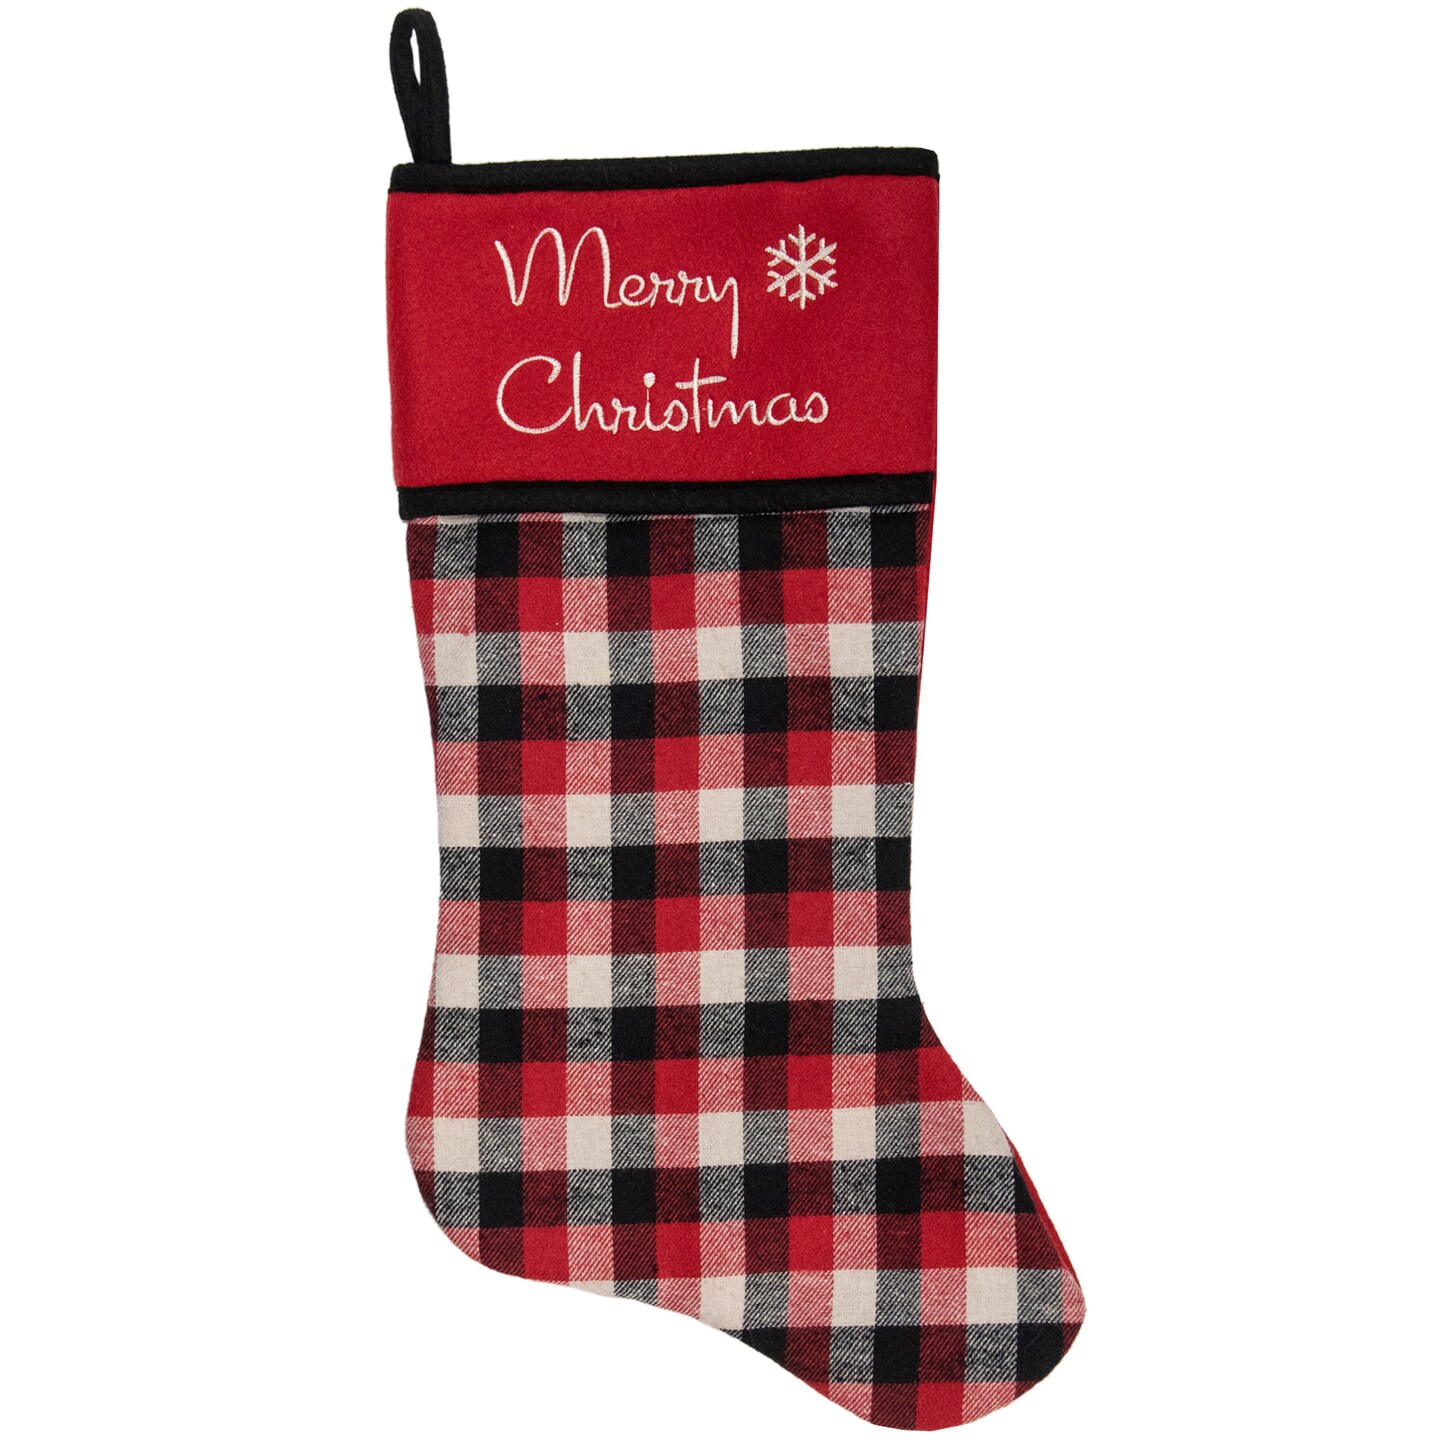 Northlight 20.5-Inch Red, Black, and White Plaid Christmas Stocking with Fleece Cuff